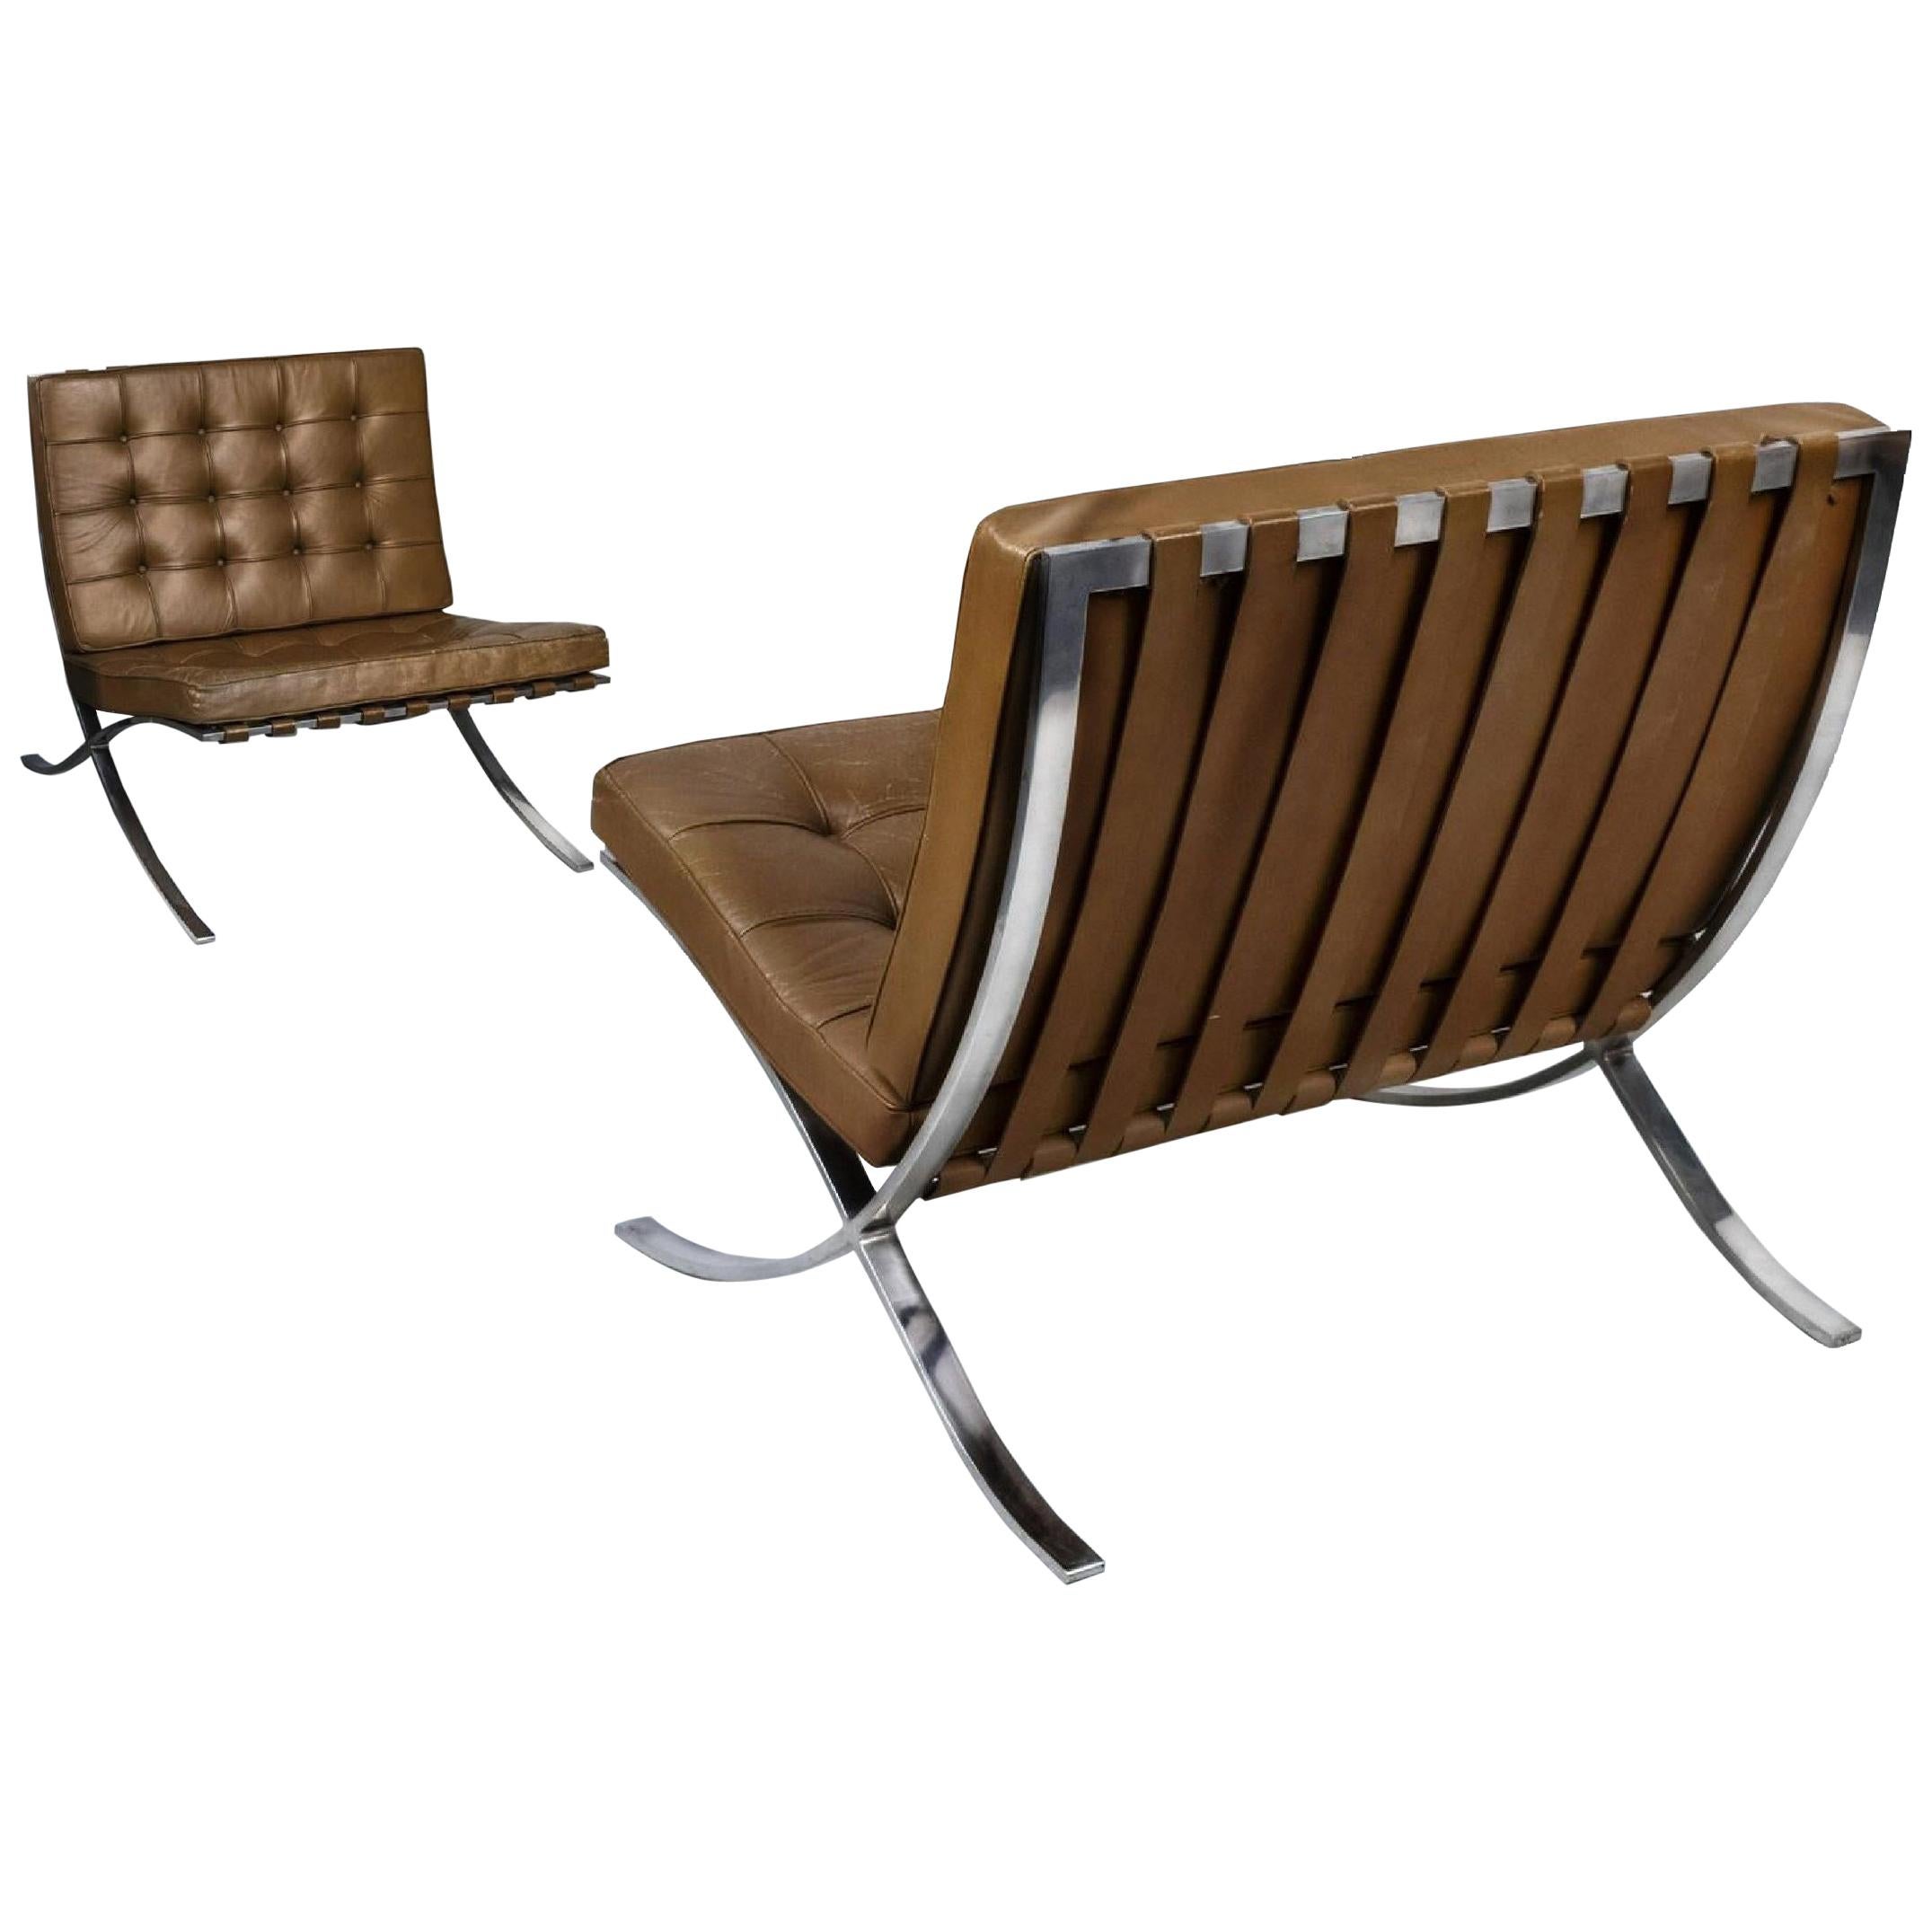 Knoll Barcelona Lounge Chair Chestnut Stainless Steel Mies Van Der Rohe 1961 At 1stdibs